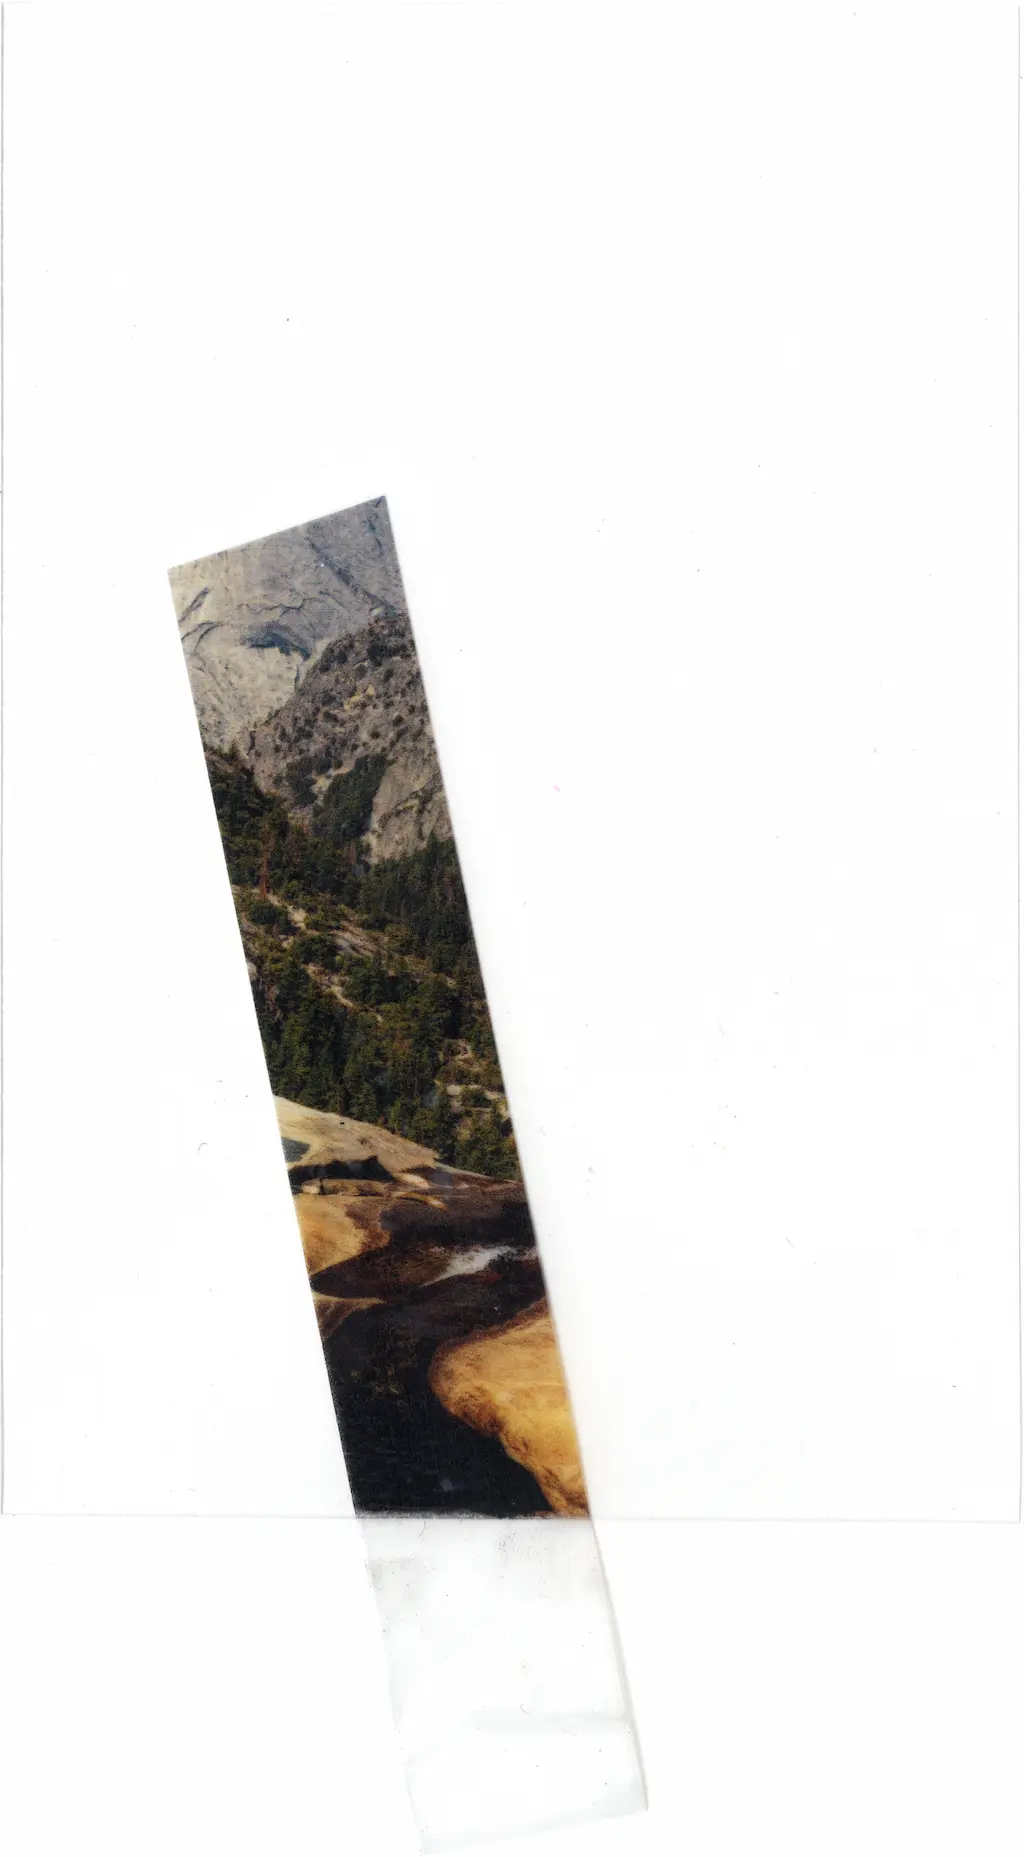 A scenic view of a river snaking down a mountainous region printed on acetate, a single piece of transparent scotch tape masking said river. The disinfectant has washed away everything but what was under the protection of the tape.